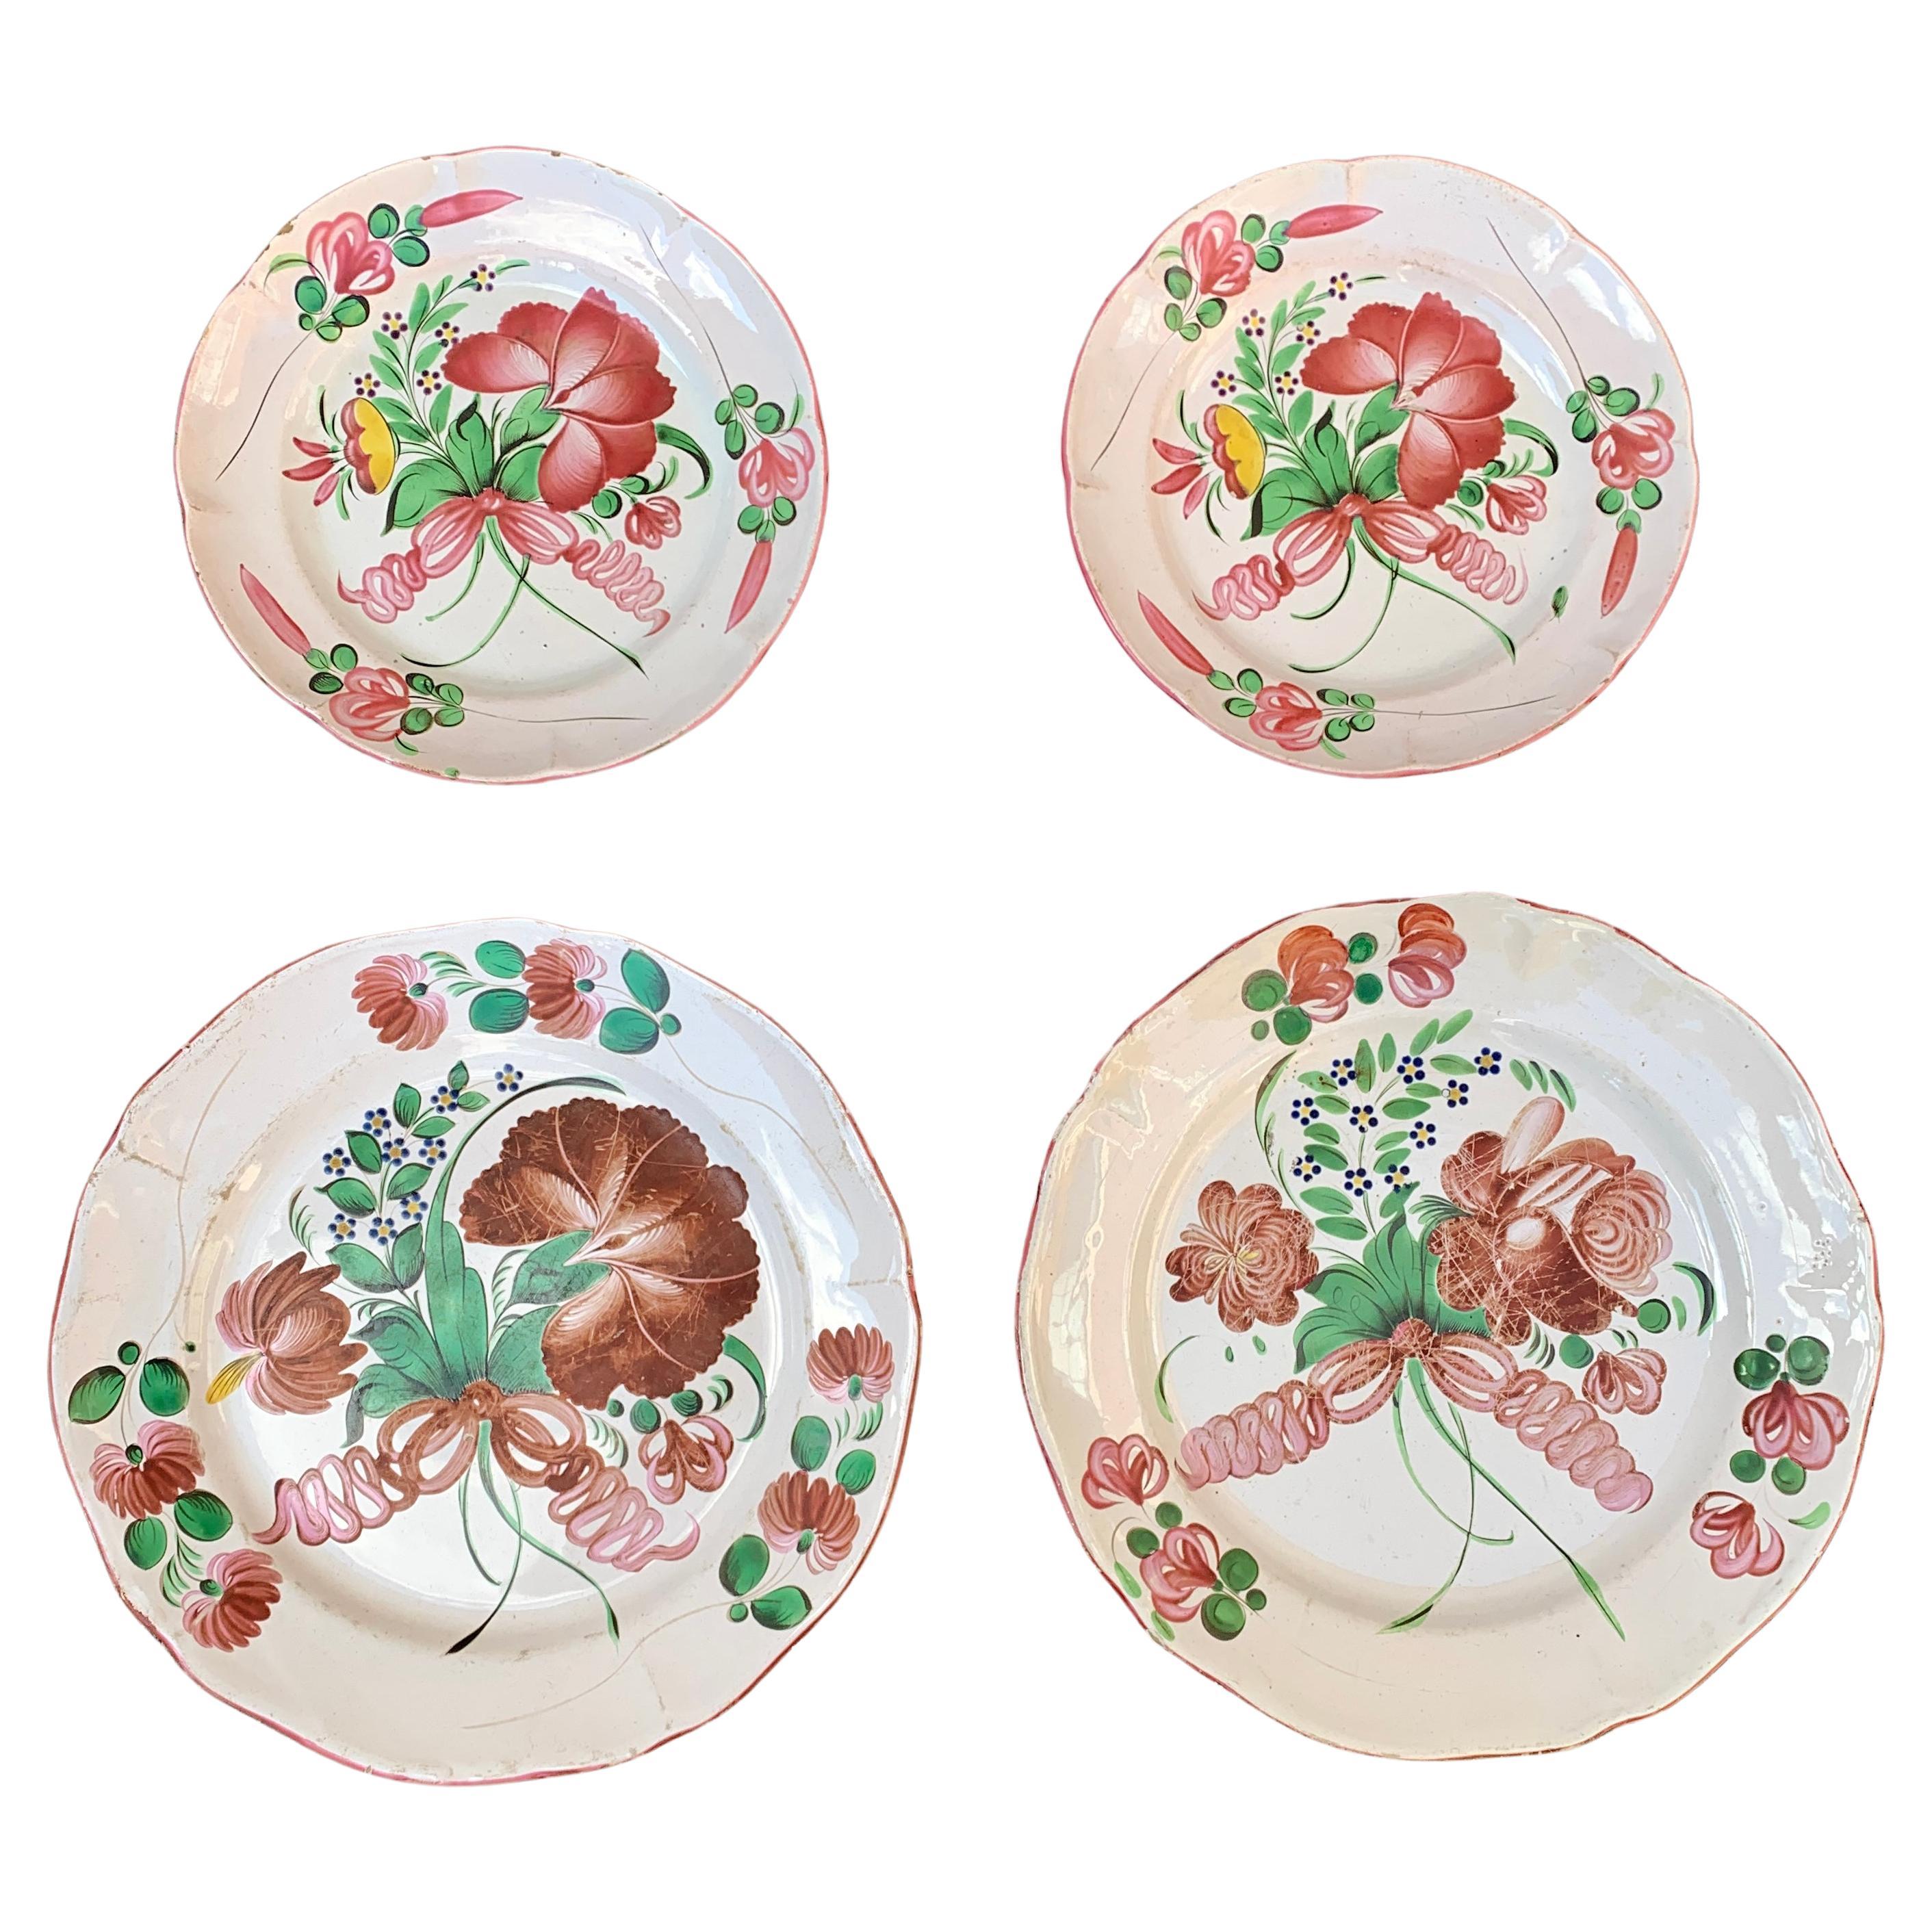 Set of 4 French Strasbourg Faience Chargers with Flower Decor